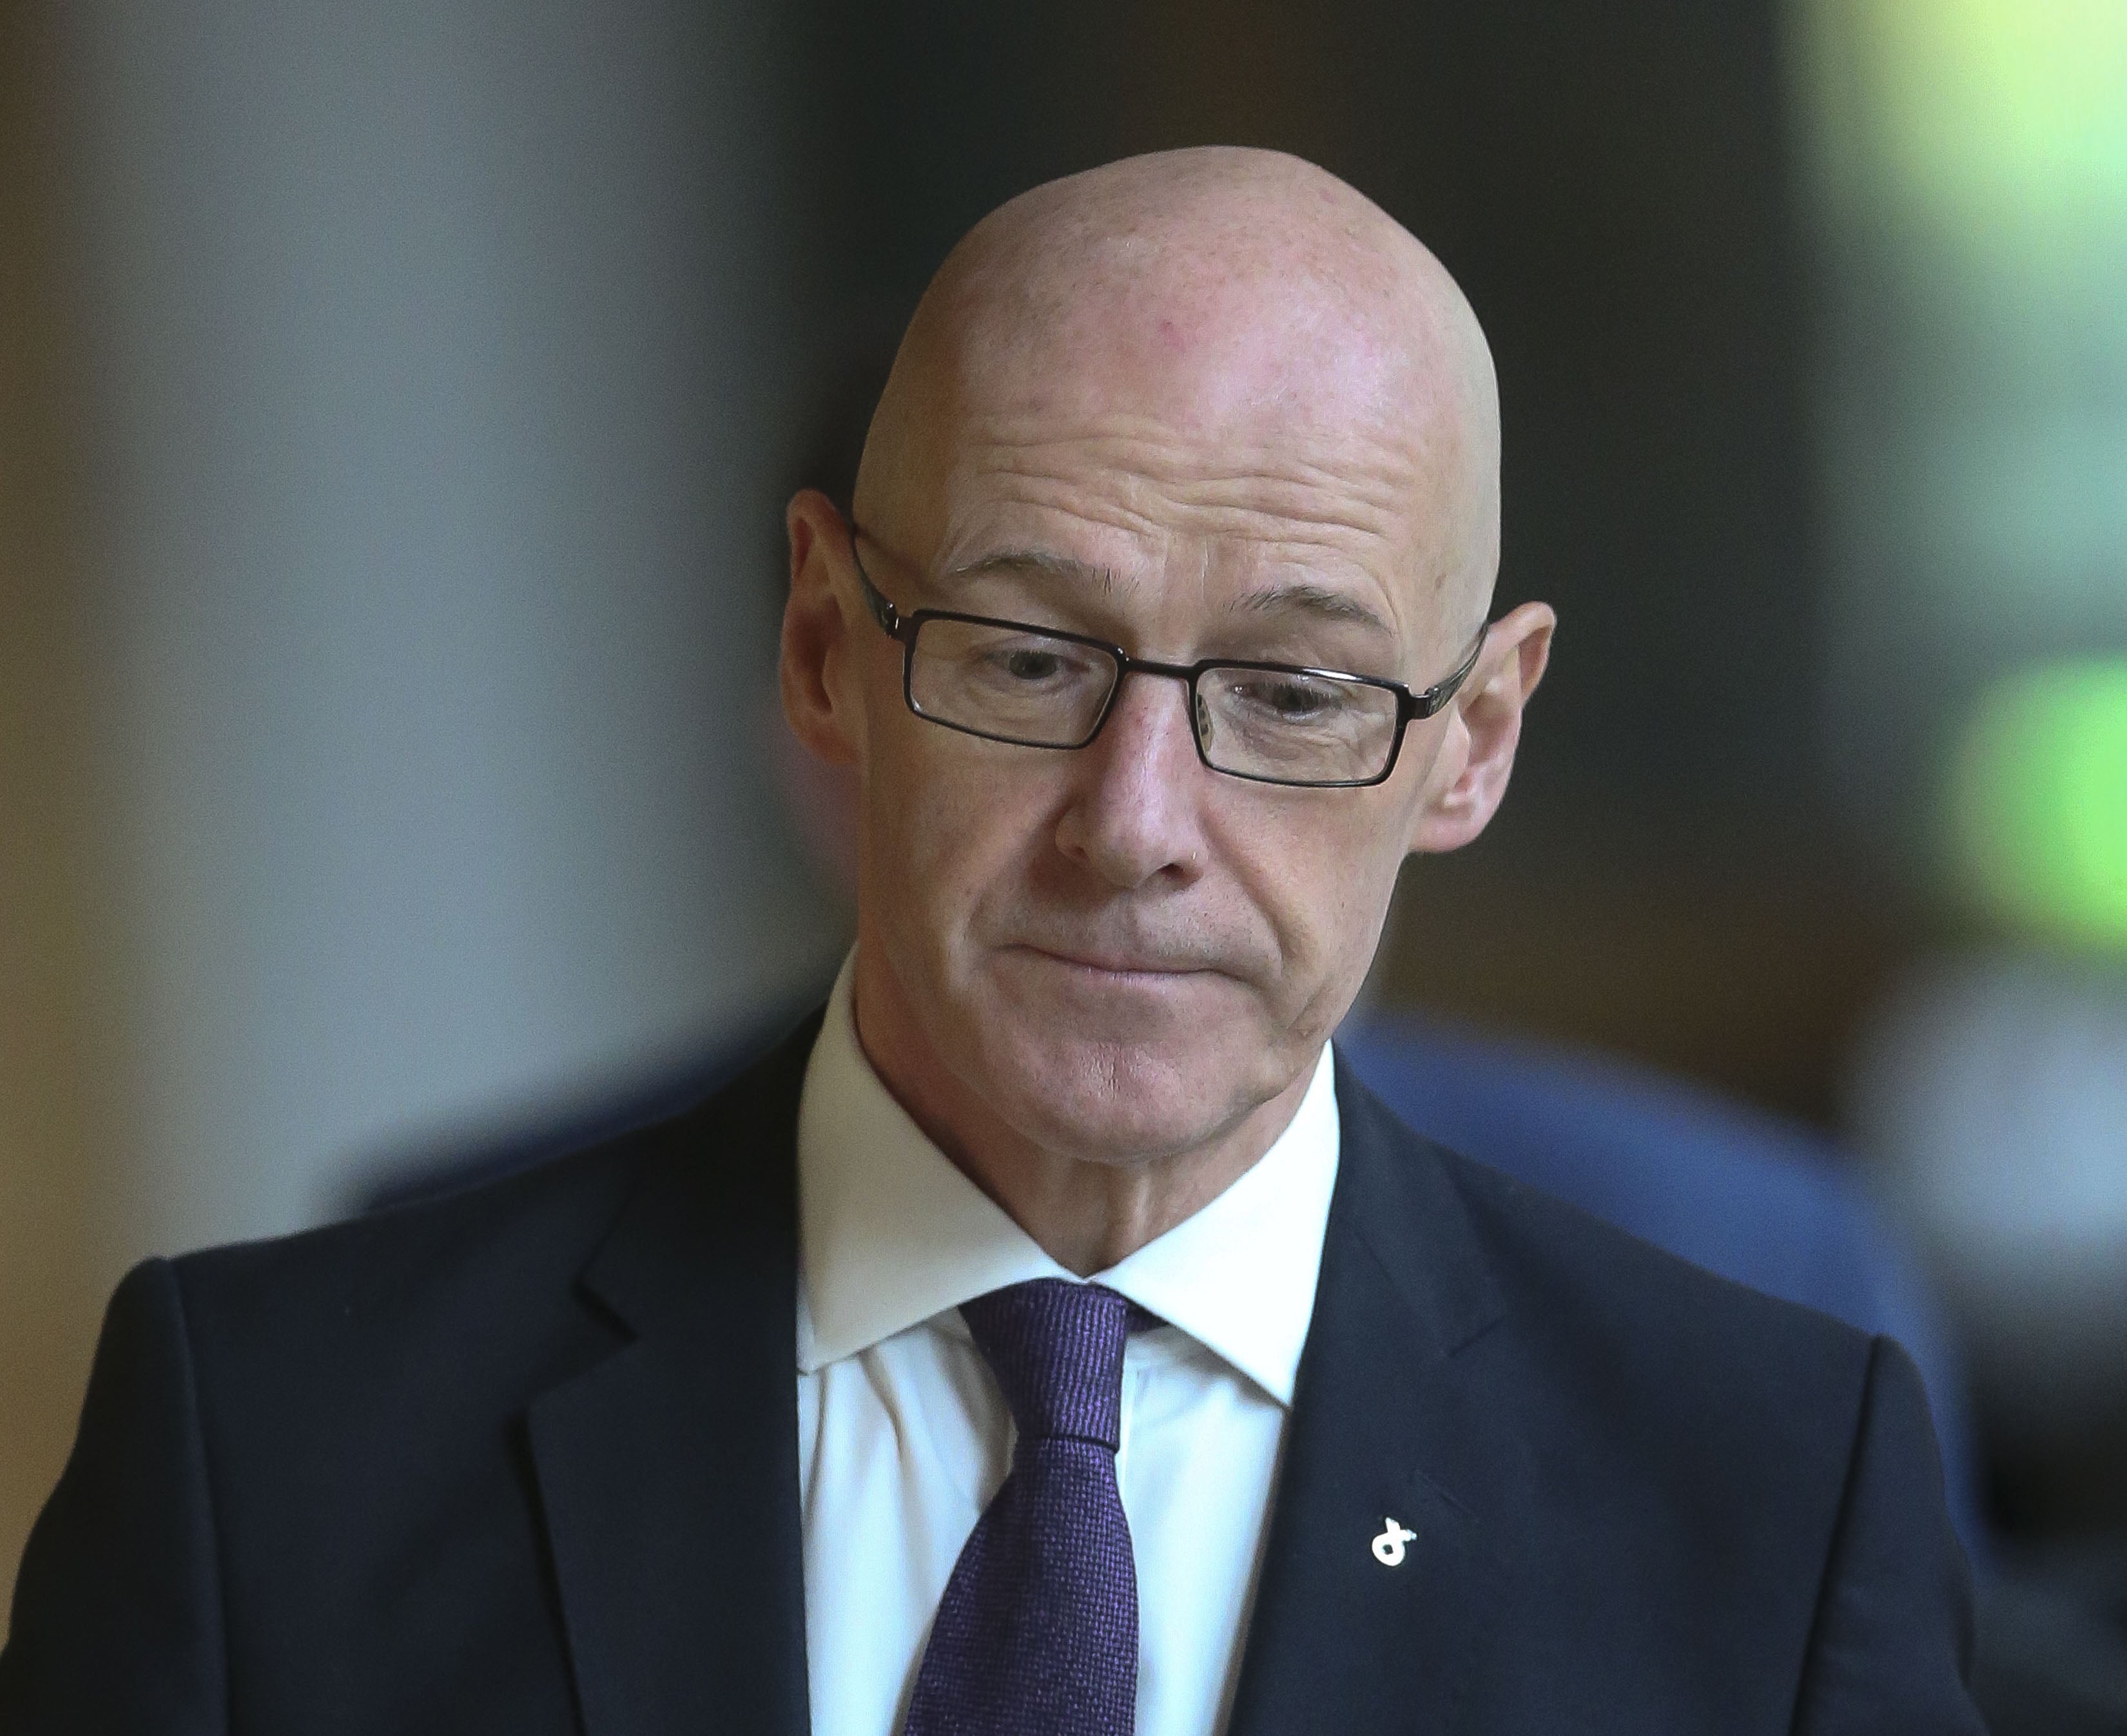 Deputy First Minister John Swinney said the rubbish piling up in Edinburgh was ‘deeply concerning’ (Fraser Bremner/Scottish Daily Mail/PA)